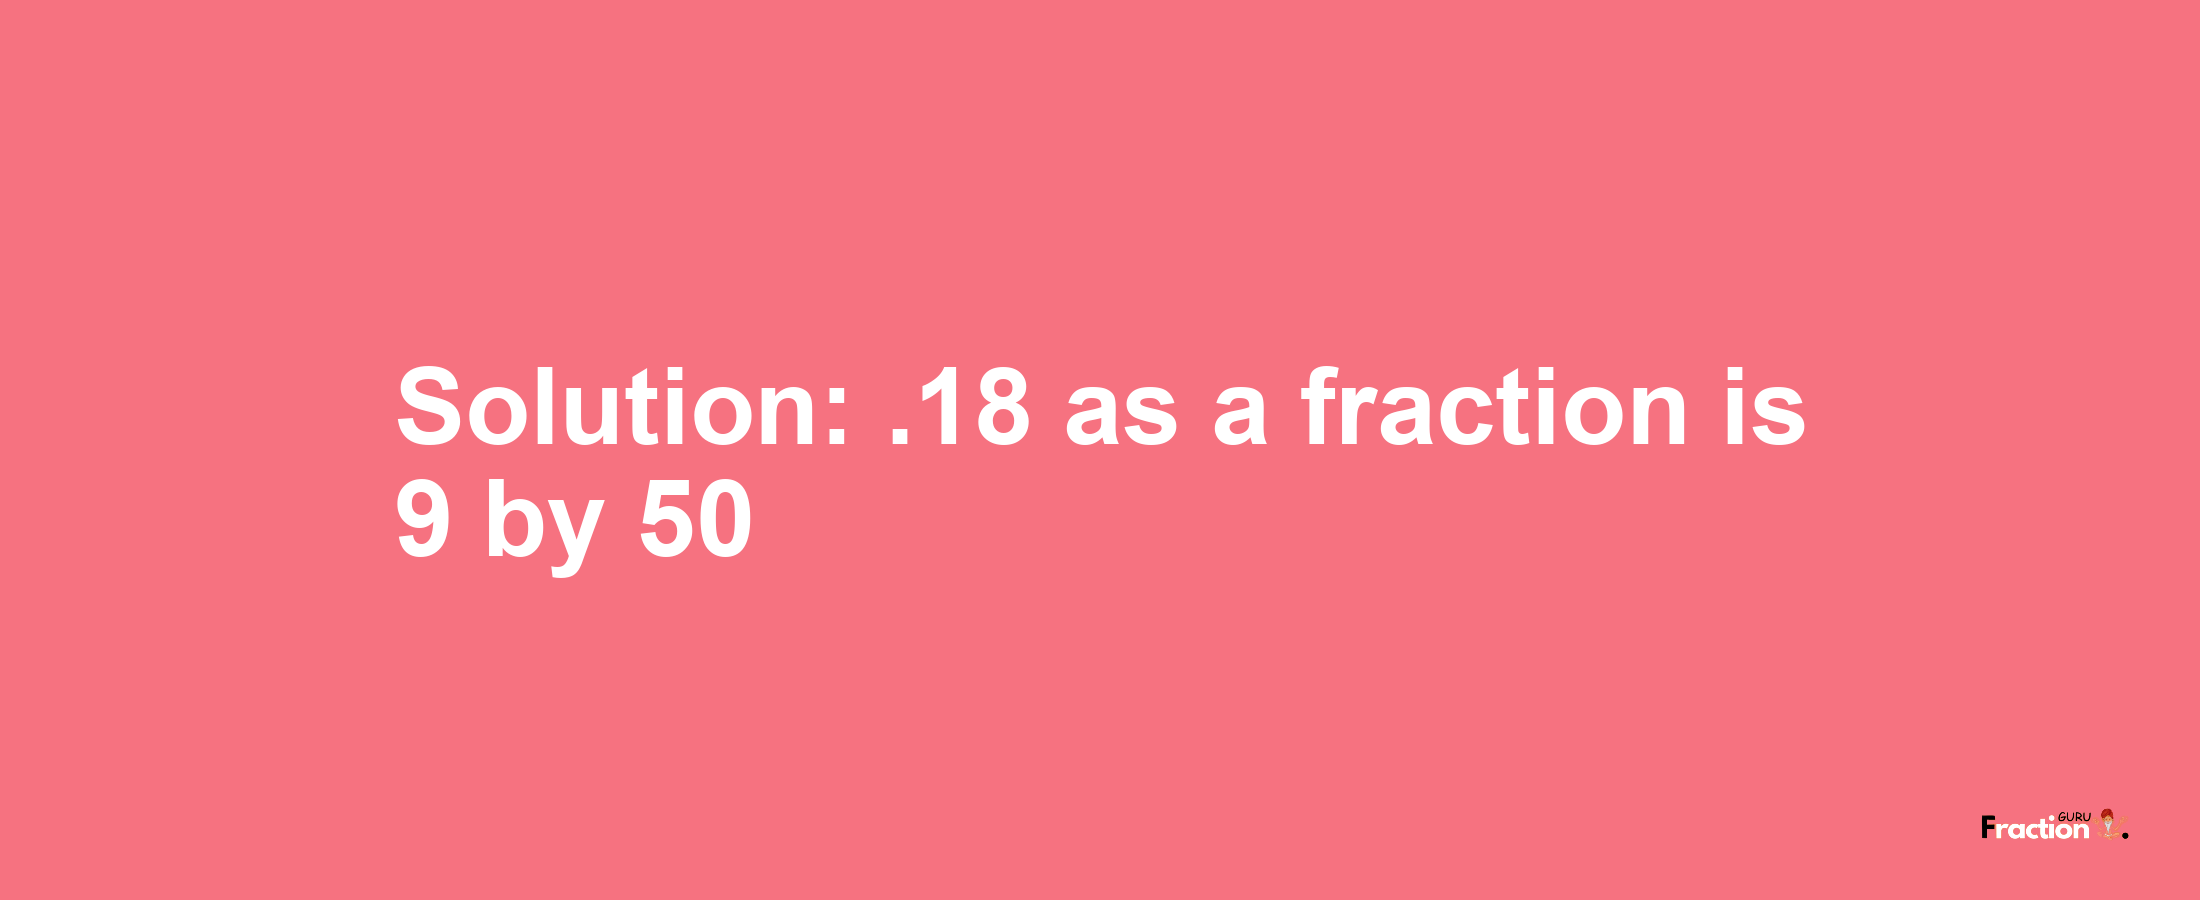 Solution:.18 as a fraction is 9/50